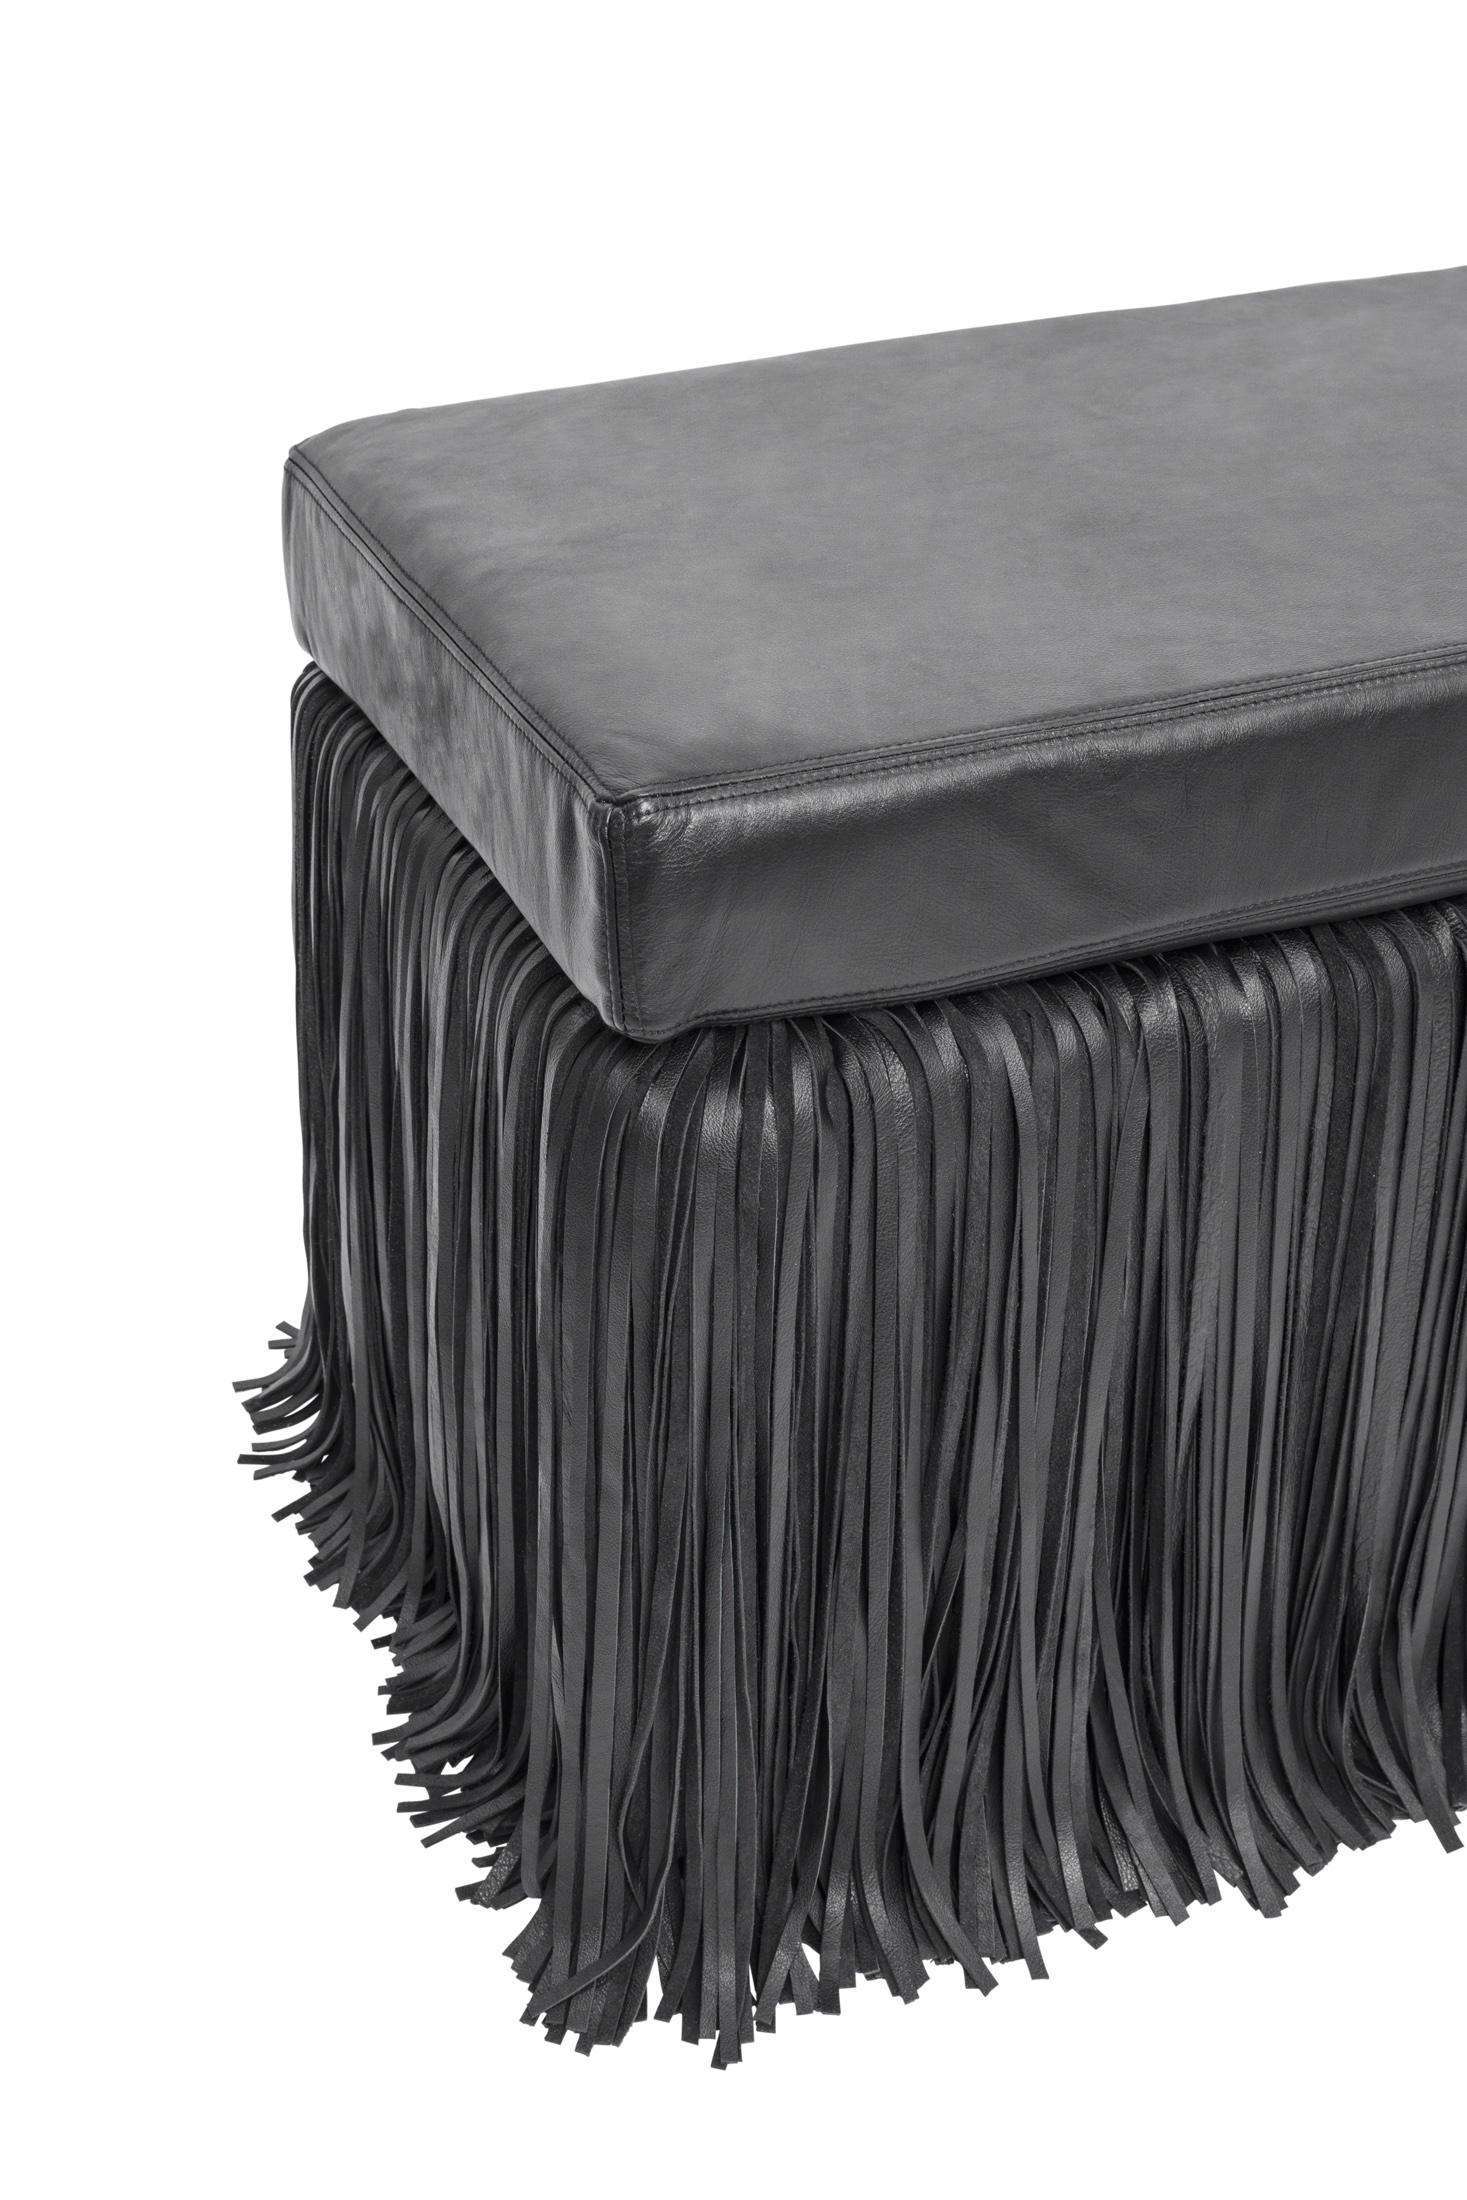 Shaggy Leather Bench